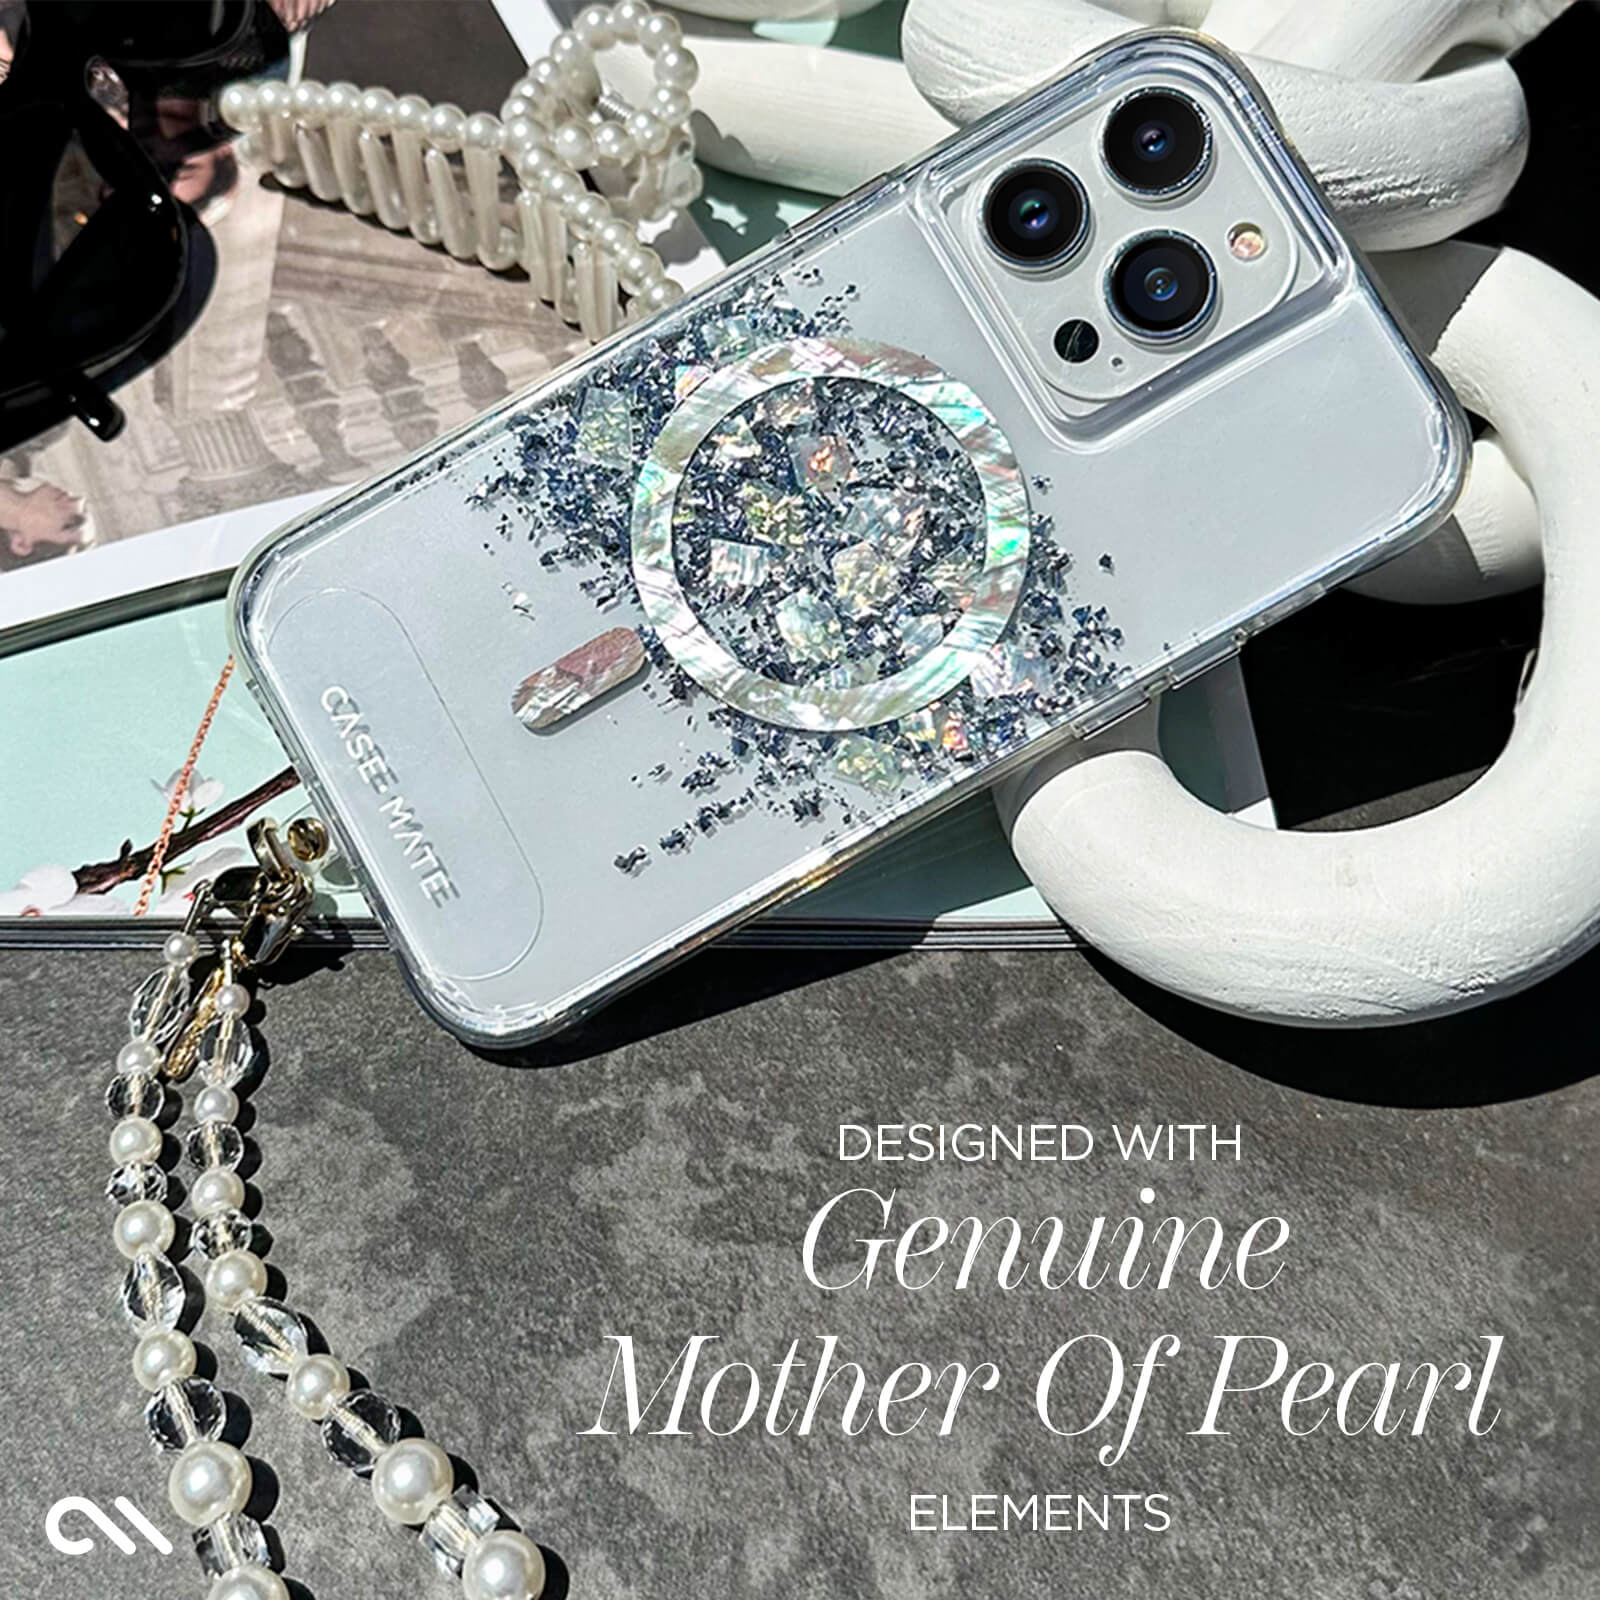 DESIGNED WITH GENUINE MOTHER OF PEARL ELEMENTS